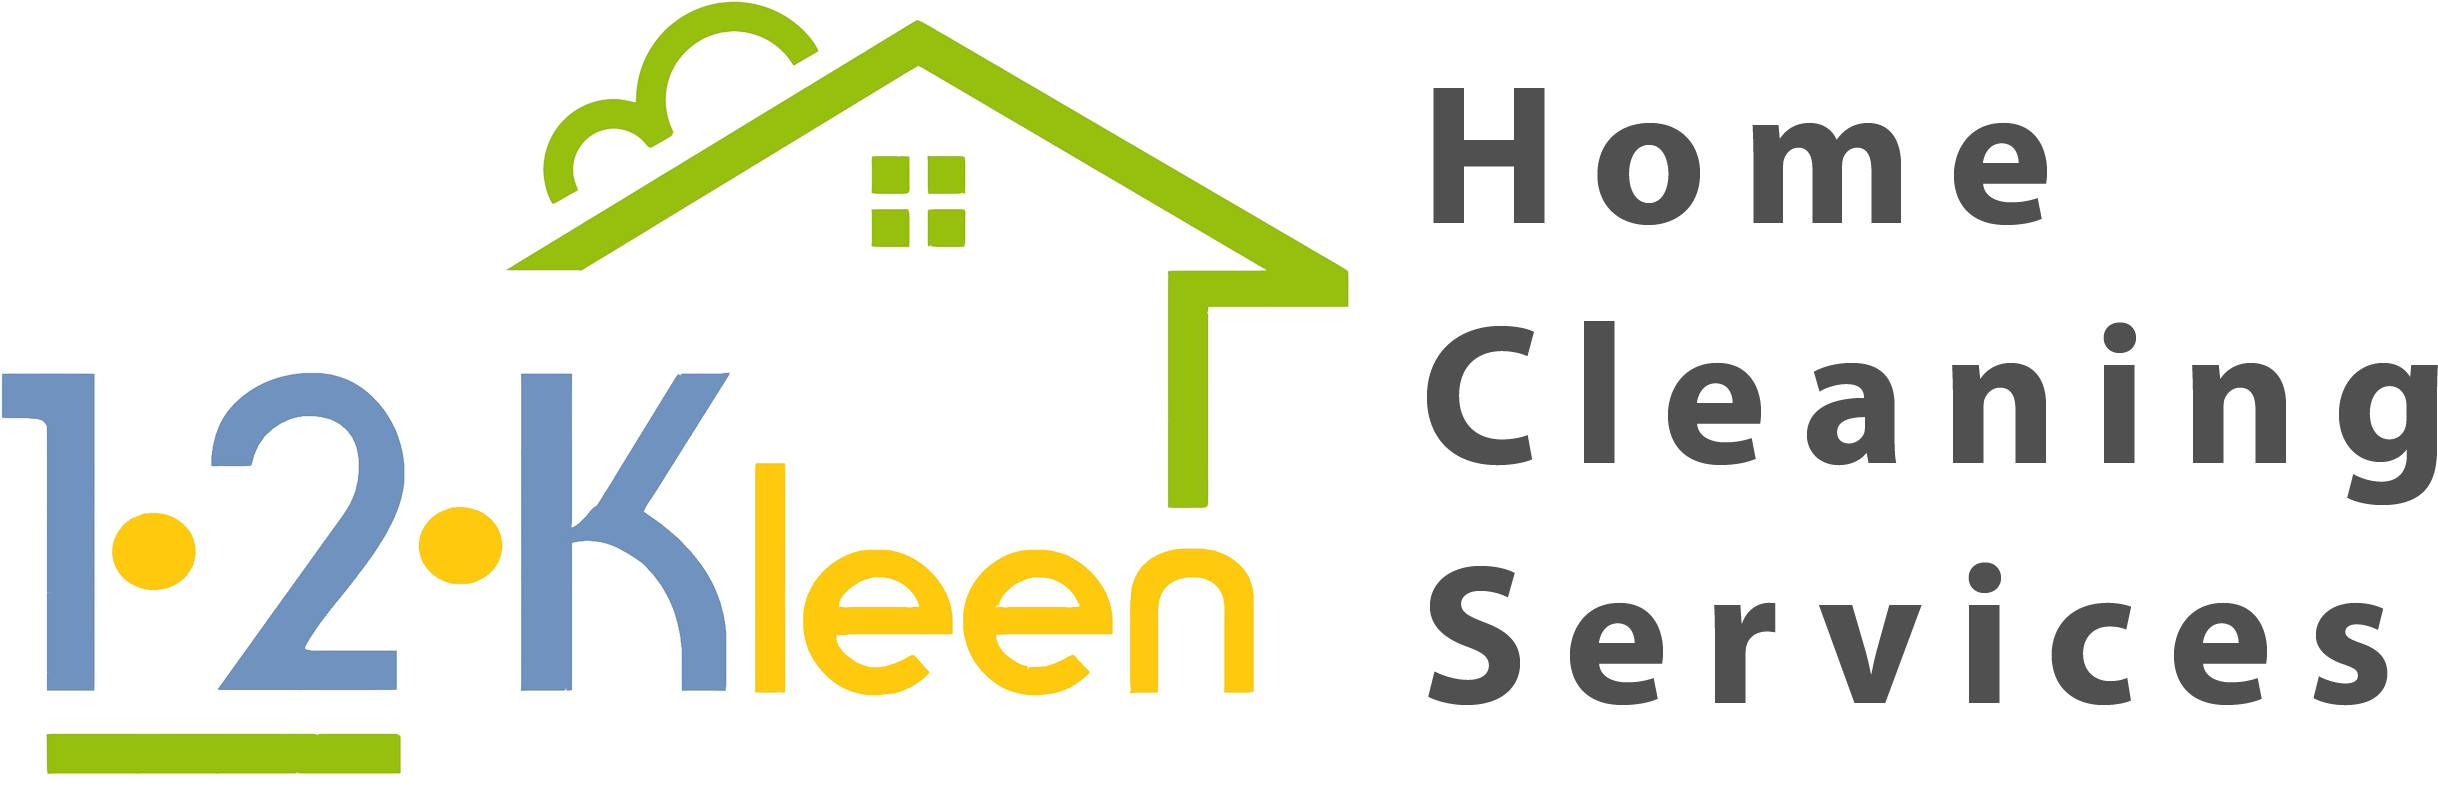 1 2 Kleen Home Cleaning Service, Pressure Washing, - Home Cleaning Service Logo (3000x800)